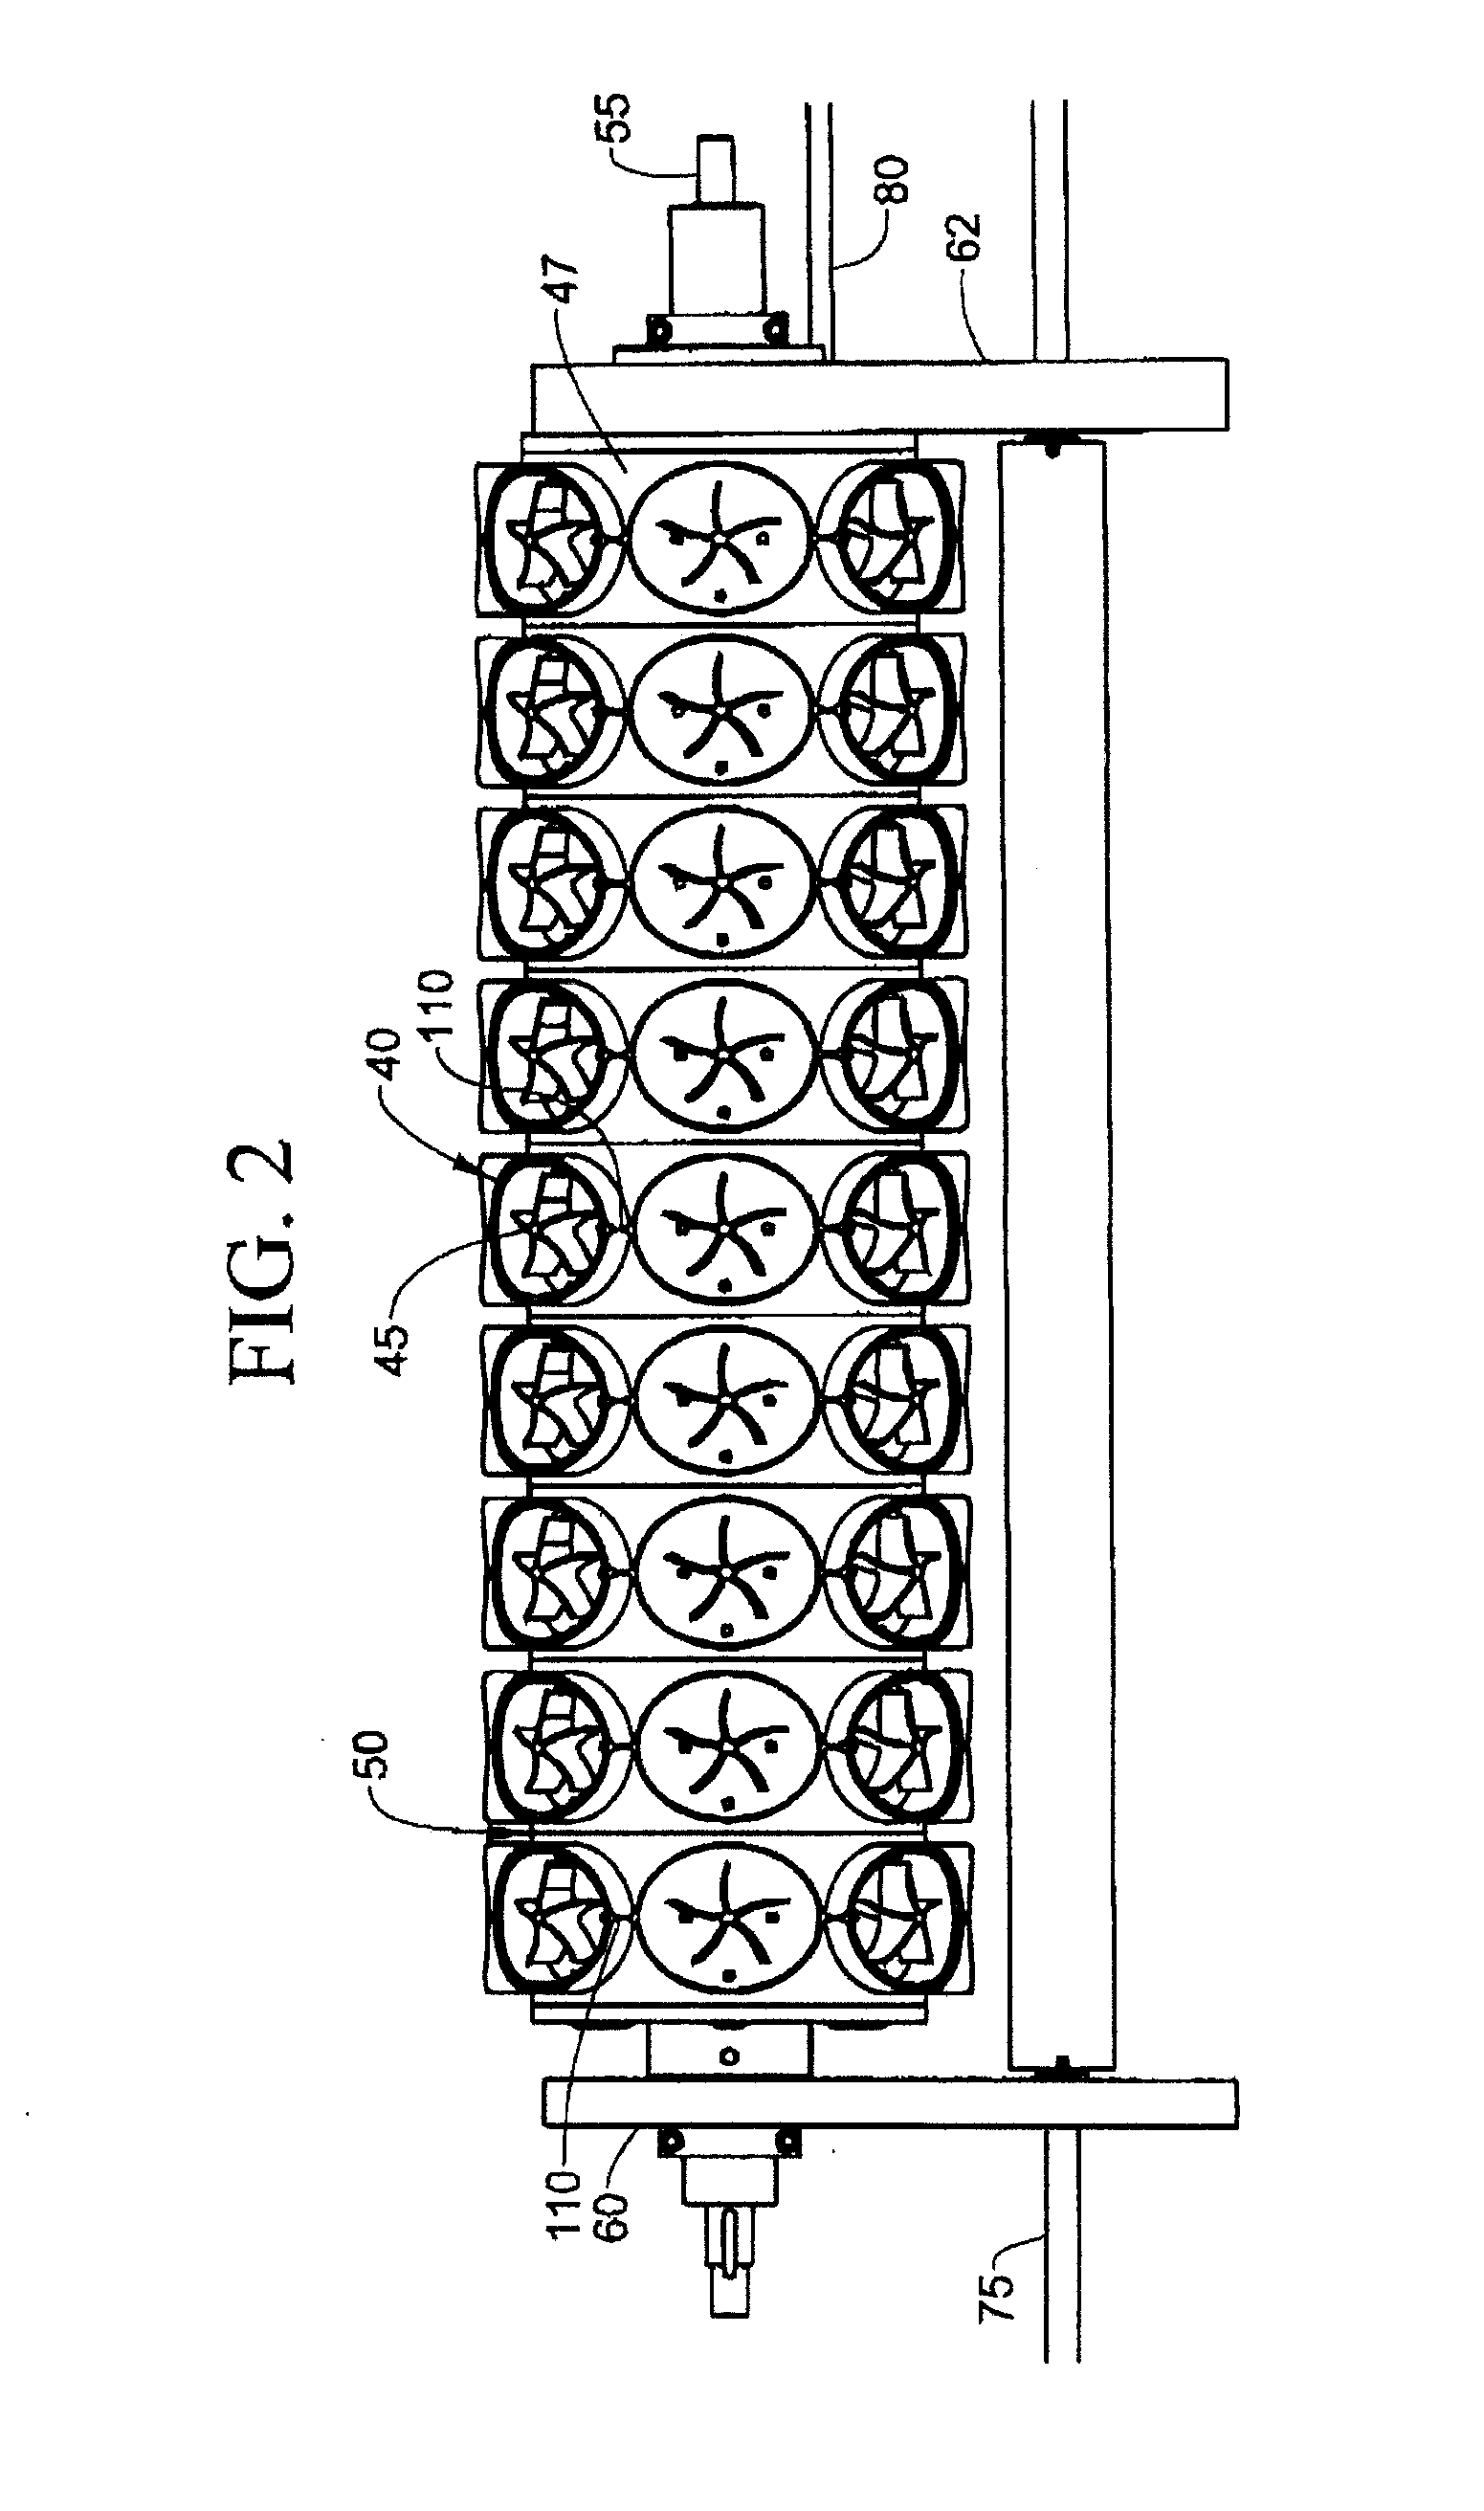 Dough cutting and stamping apparatus and method